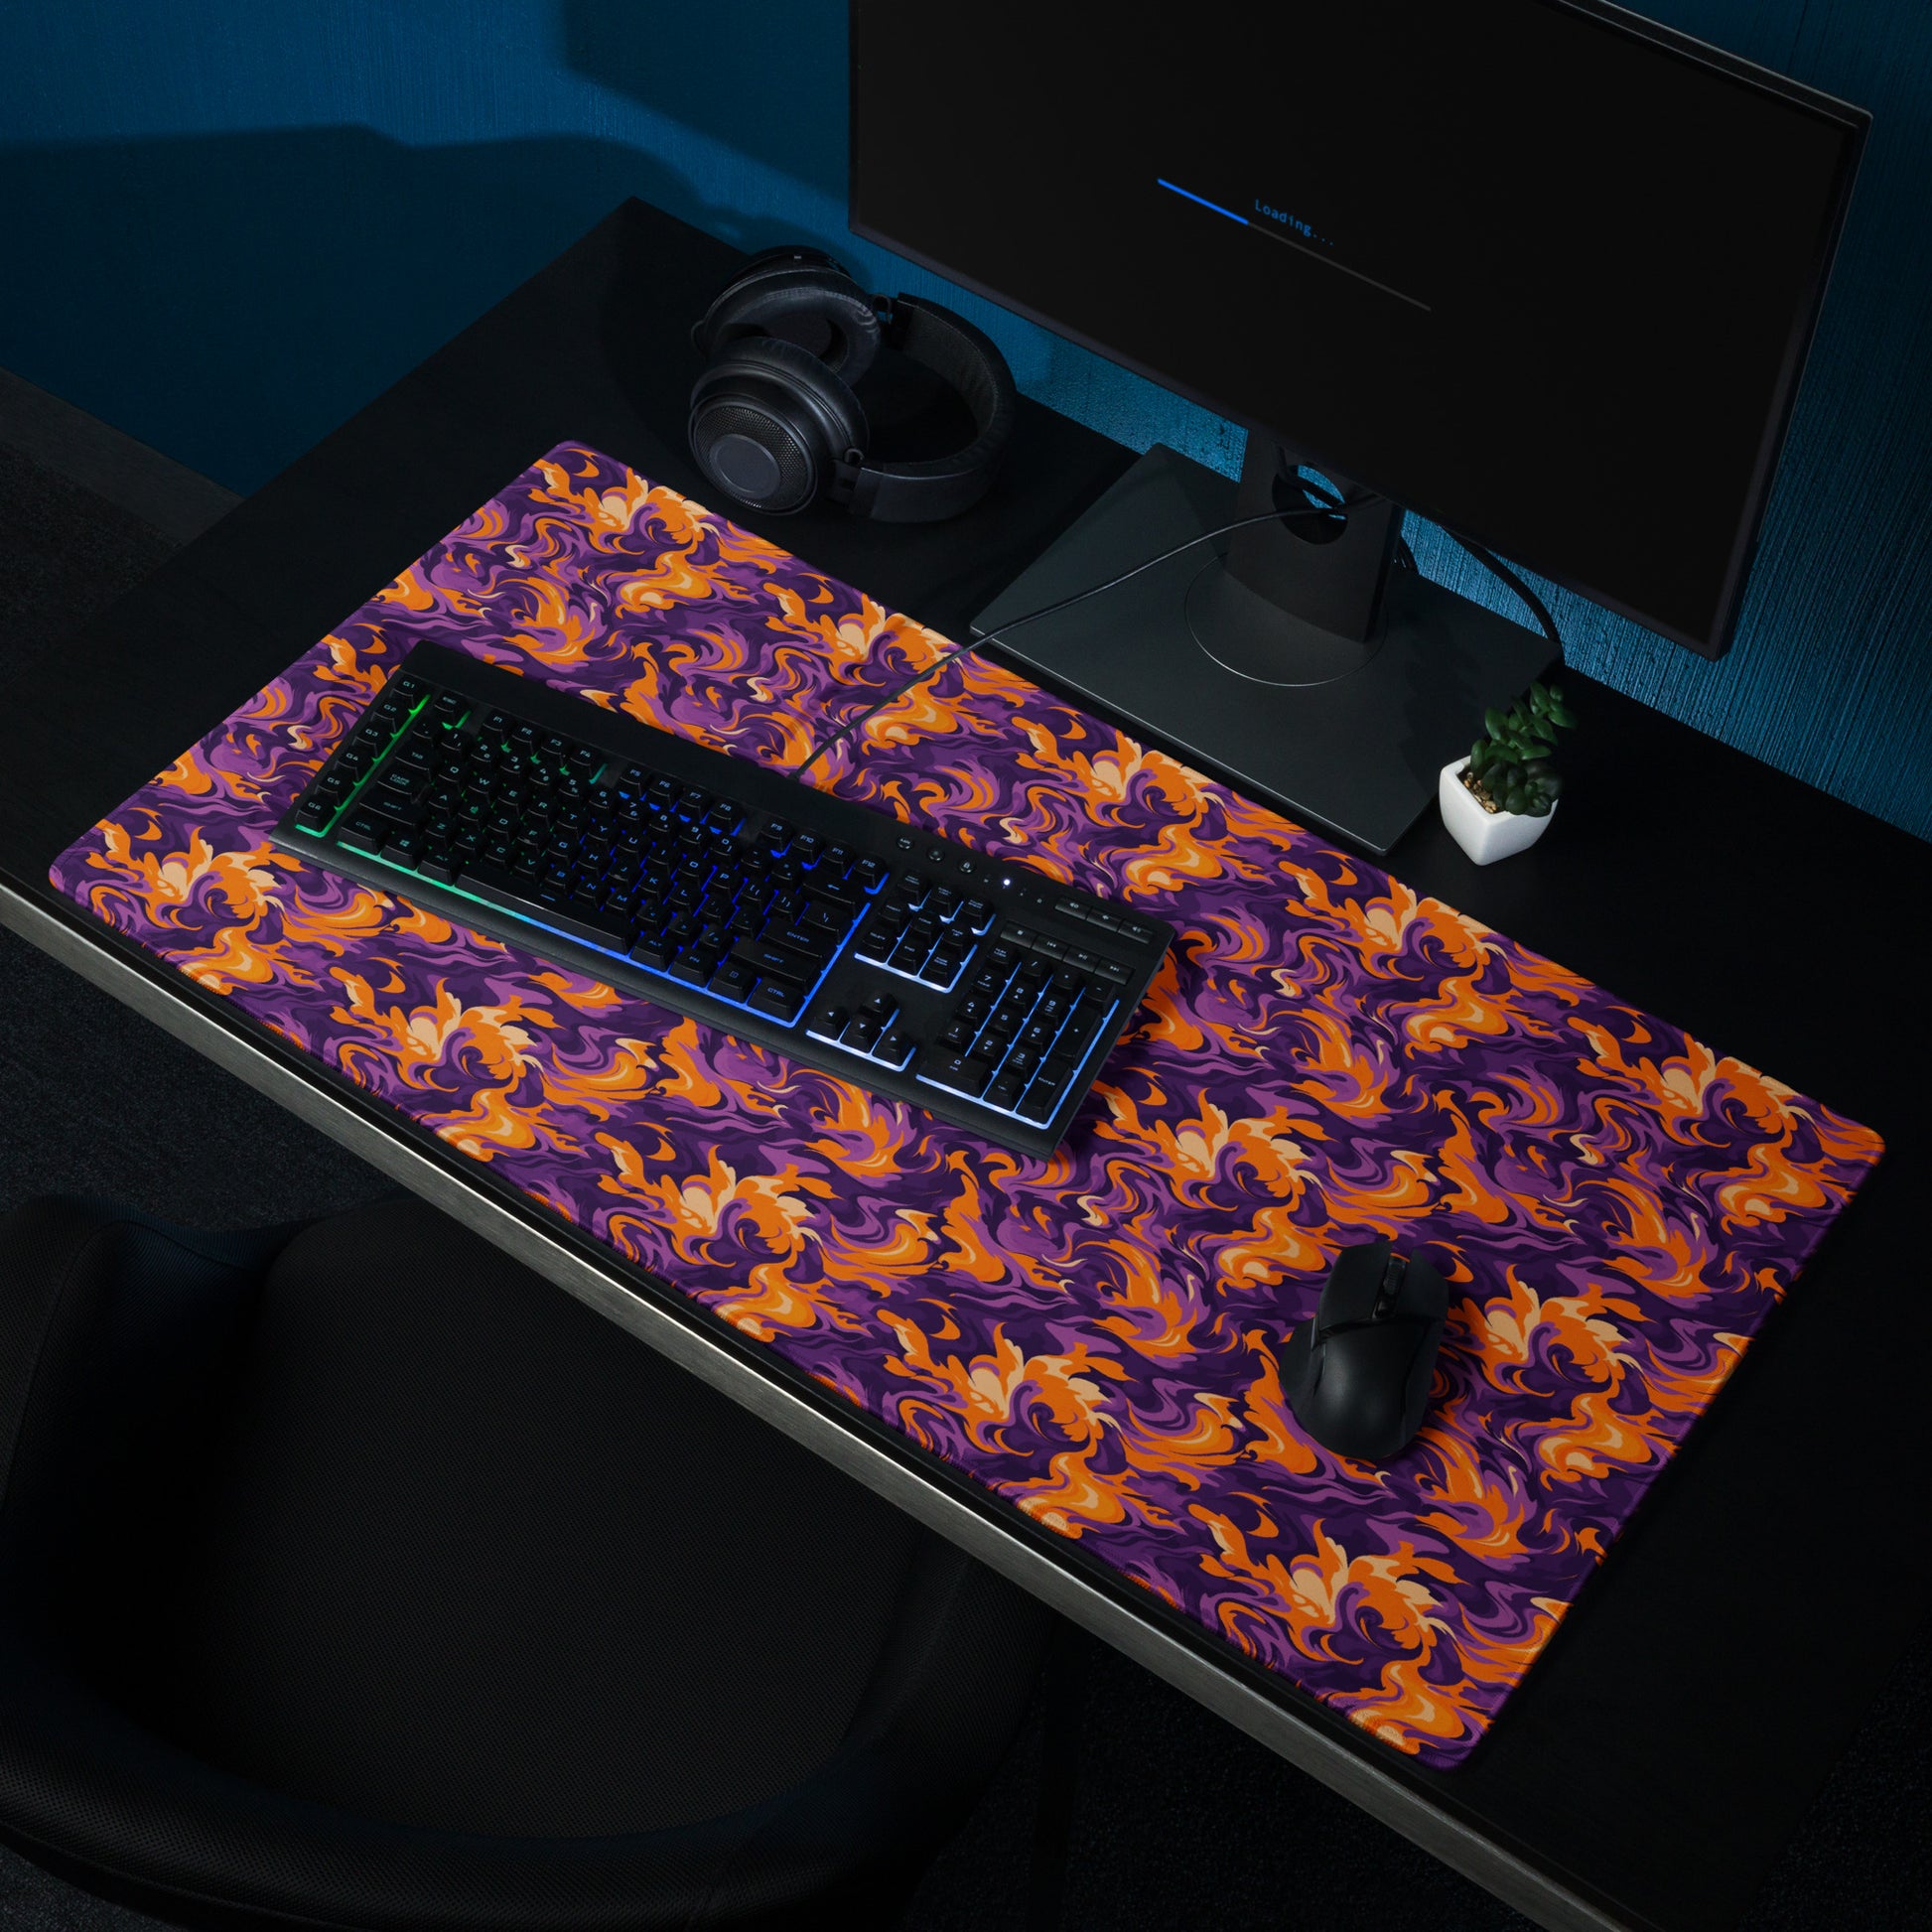 A 36" x 18" desk pad with a purple and orange camo pattern sitting on a desk.